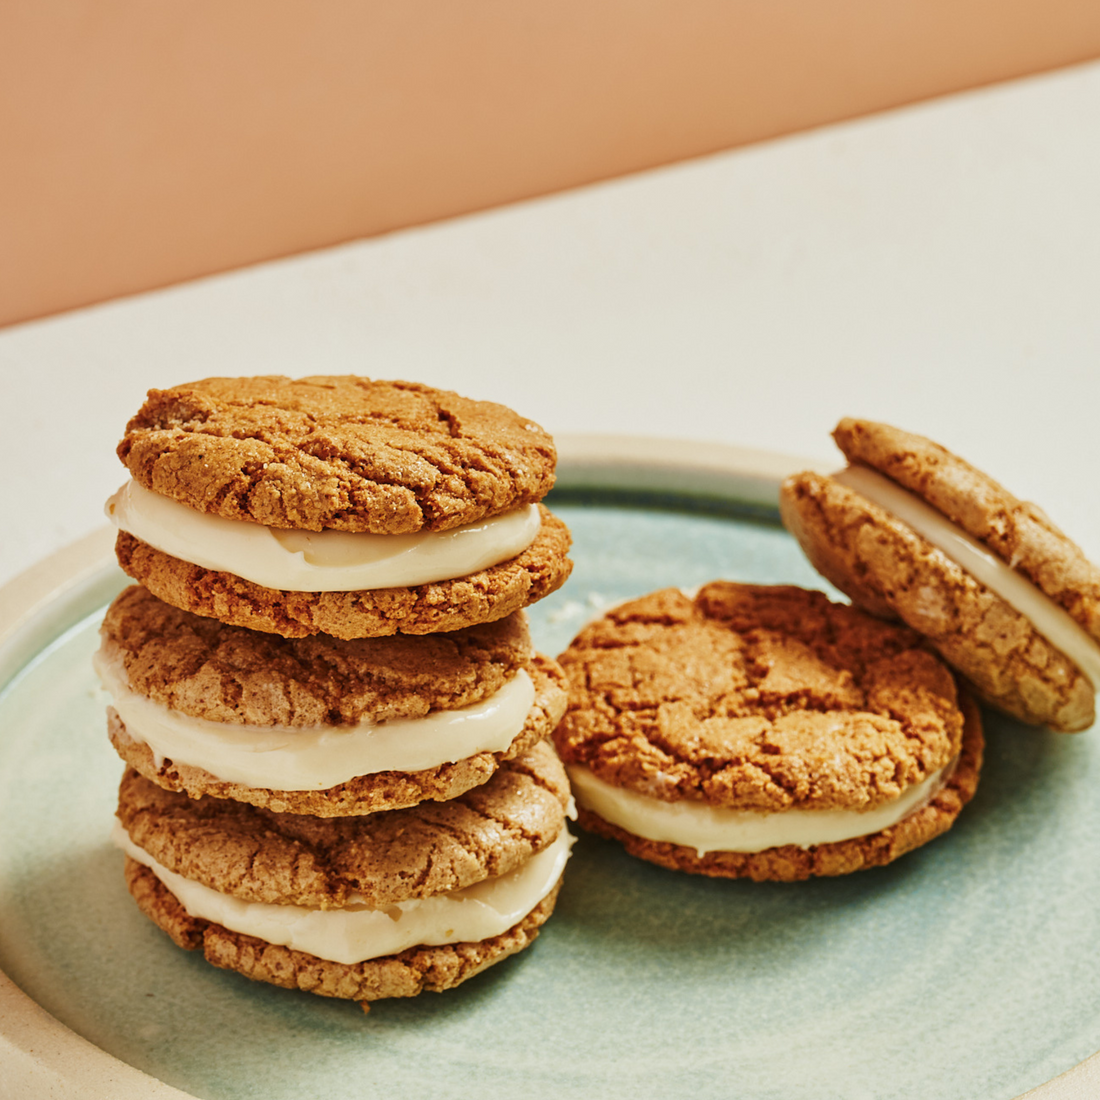 Toasted Oatmeal Pies